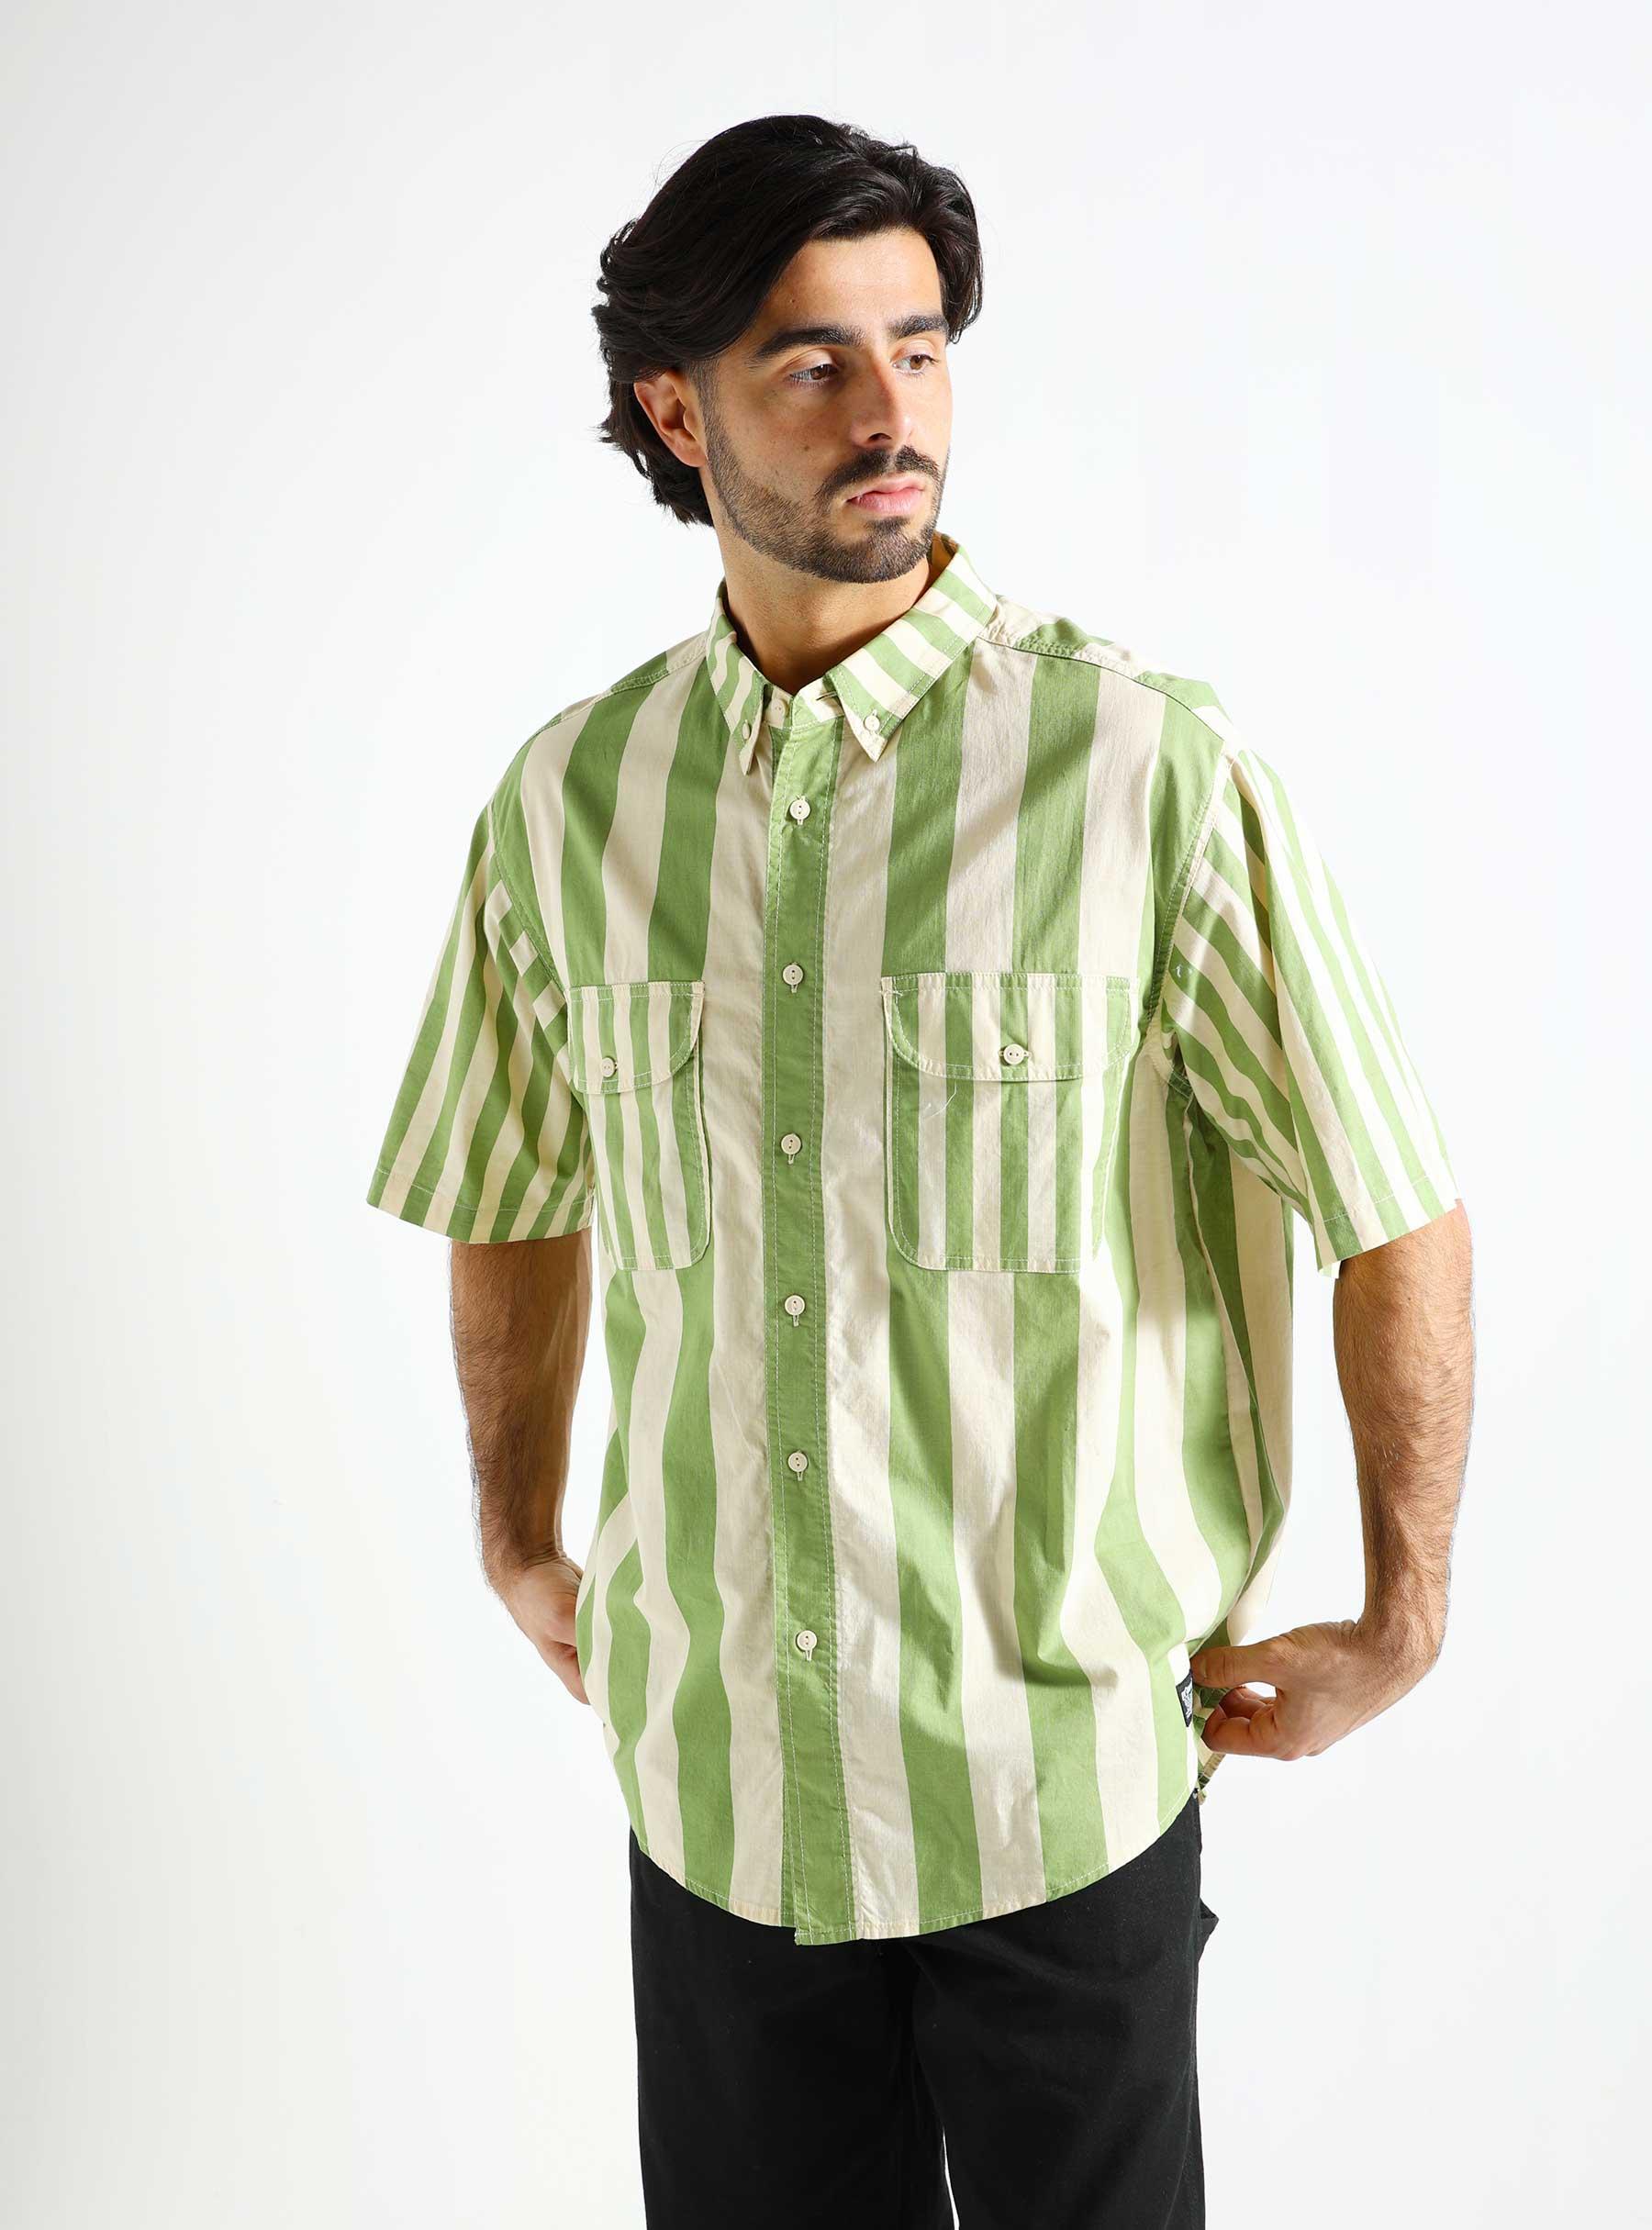 Skate Woven Mixed Up T-shirt Green White Stripes A4329-0002